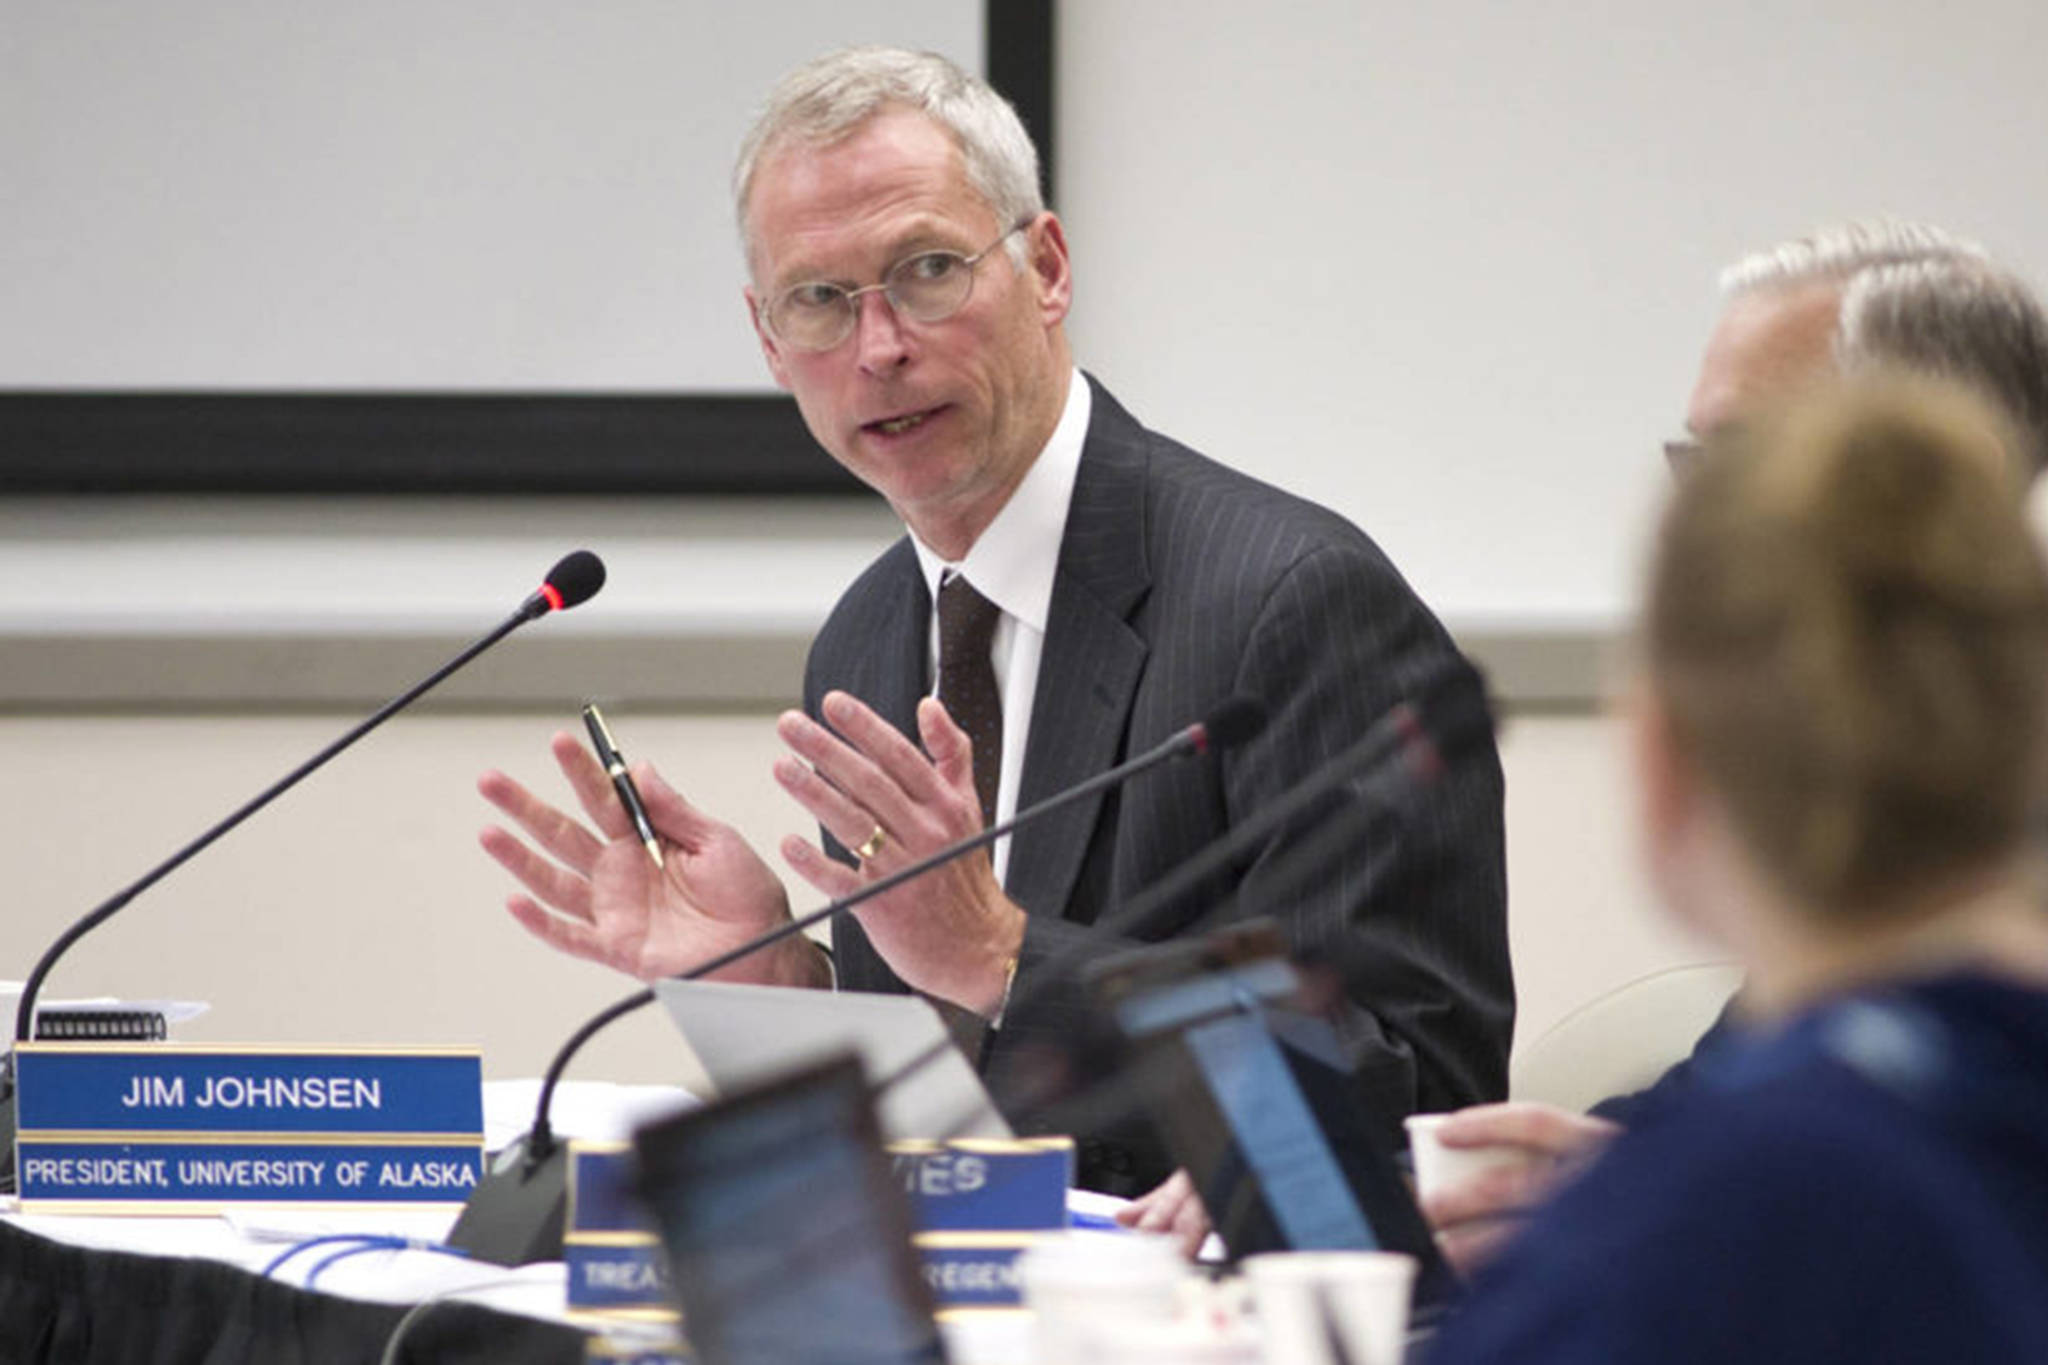 University of Alaska President Jim Johnsen makes a presentation to the university’s Board of Regents at the UAS Recreation Center on Sept. 15, 2016. A declaration of financial exigency that would have allowed University of Alaska to make drastic cuts was rescinded Tuesday. (Michael Penn | Juneau Empire File)